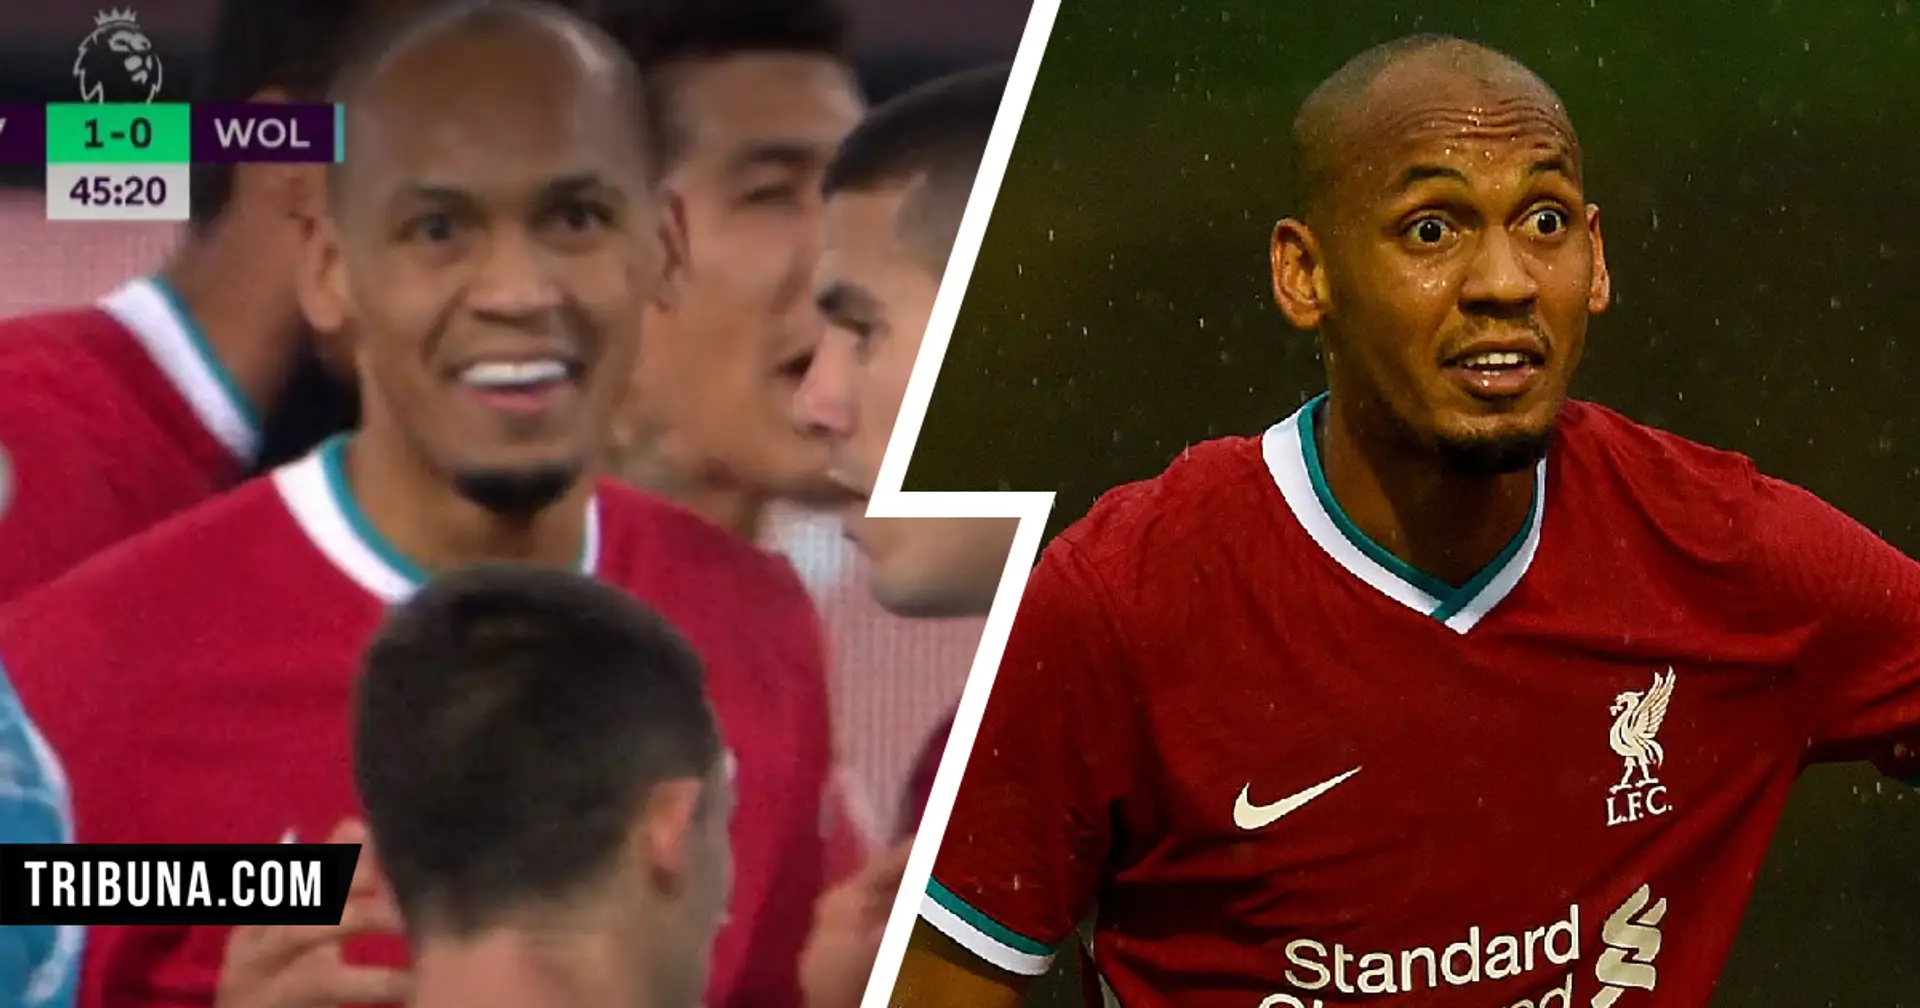 Fabinho let Conor Coady know exactly what he thought of his dive with this hilarious reaction